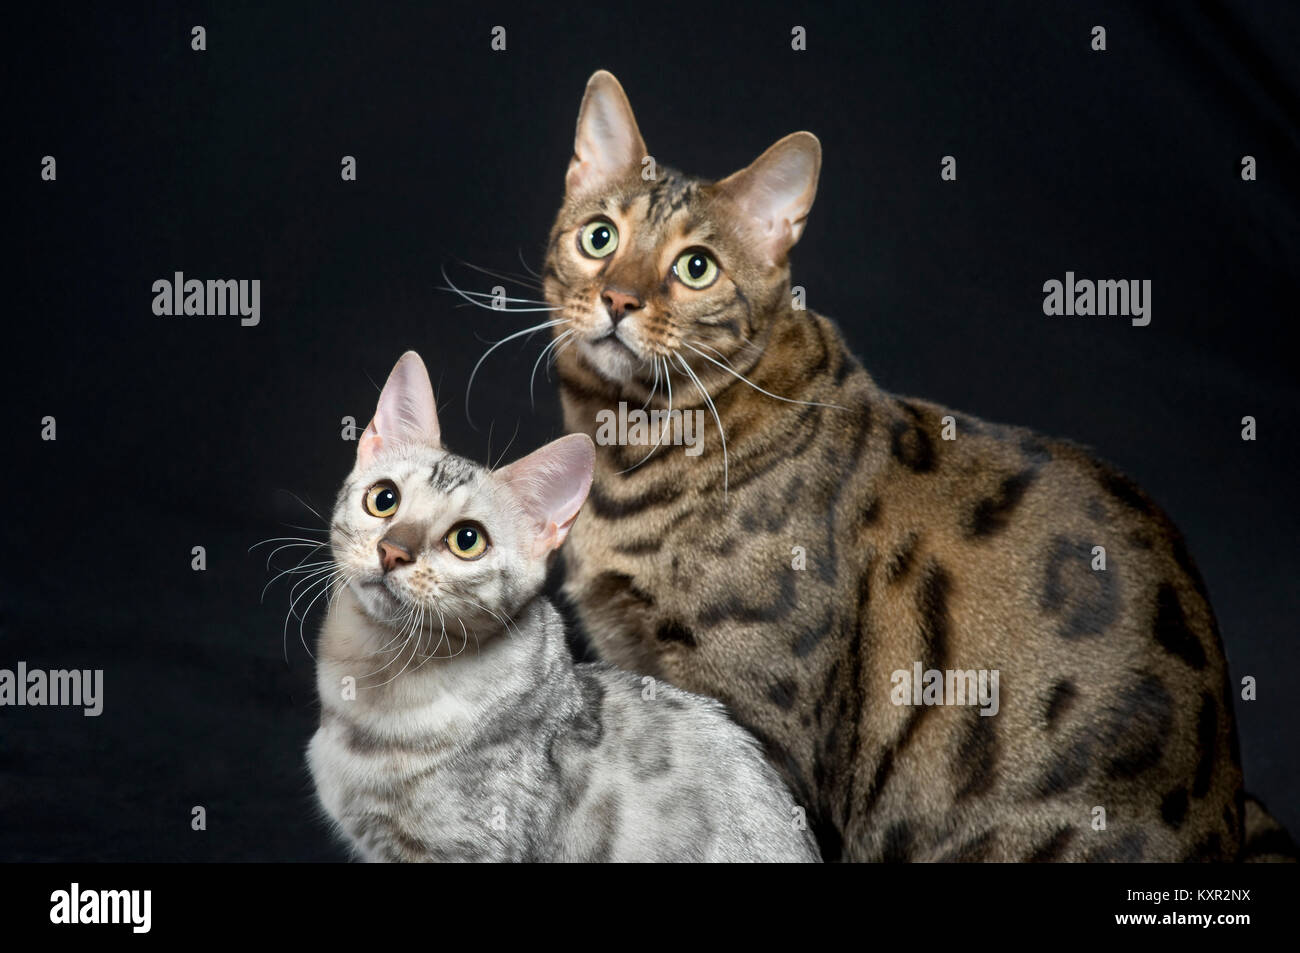 Two Purebred Bengal cats from Pixel Perfect Cats cattery, one silver one brown. Stock Photo